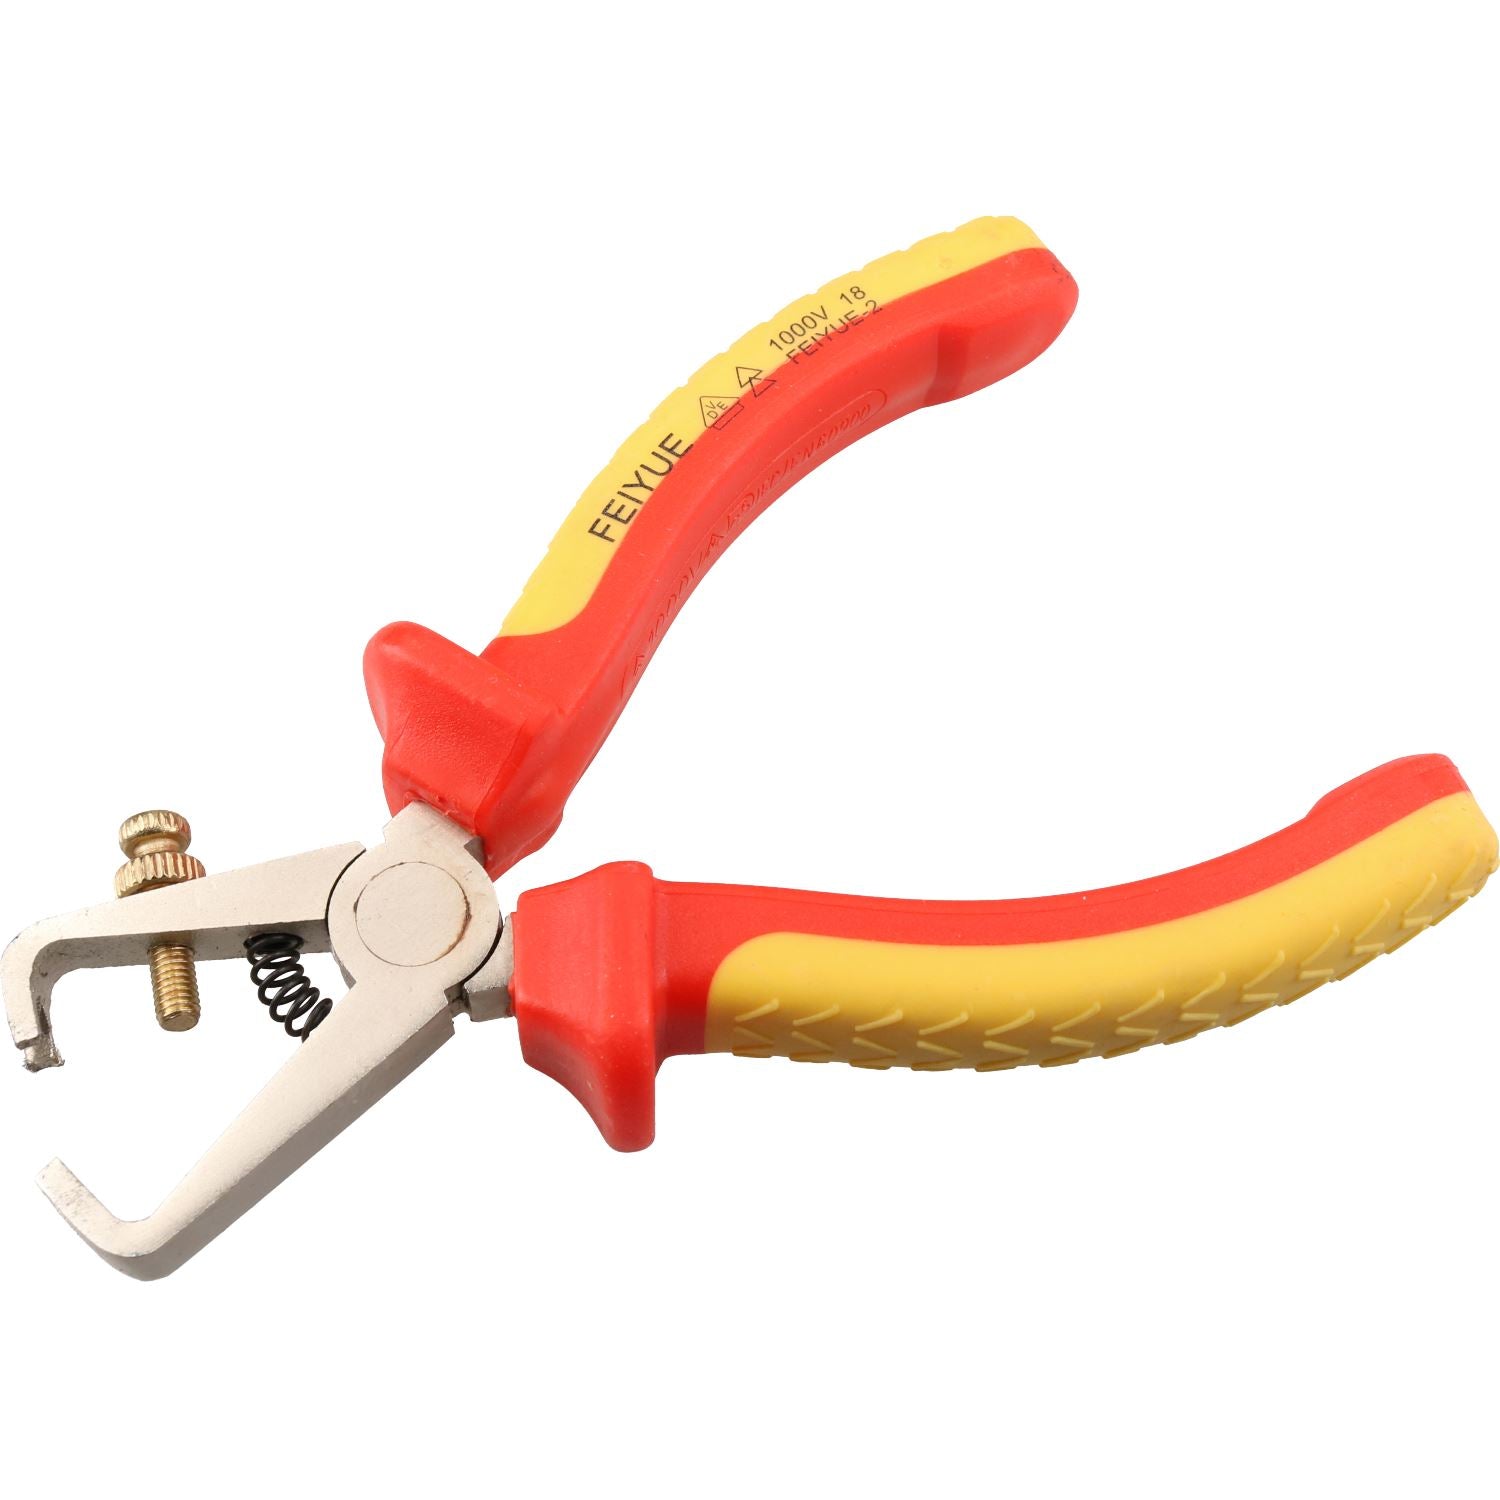 160mm VDE Electrical Wire Strippers Cutters For Electricians or Use On Hybrid Cars